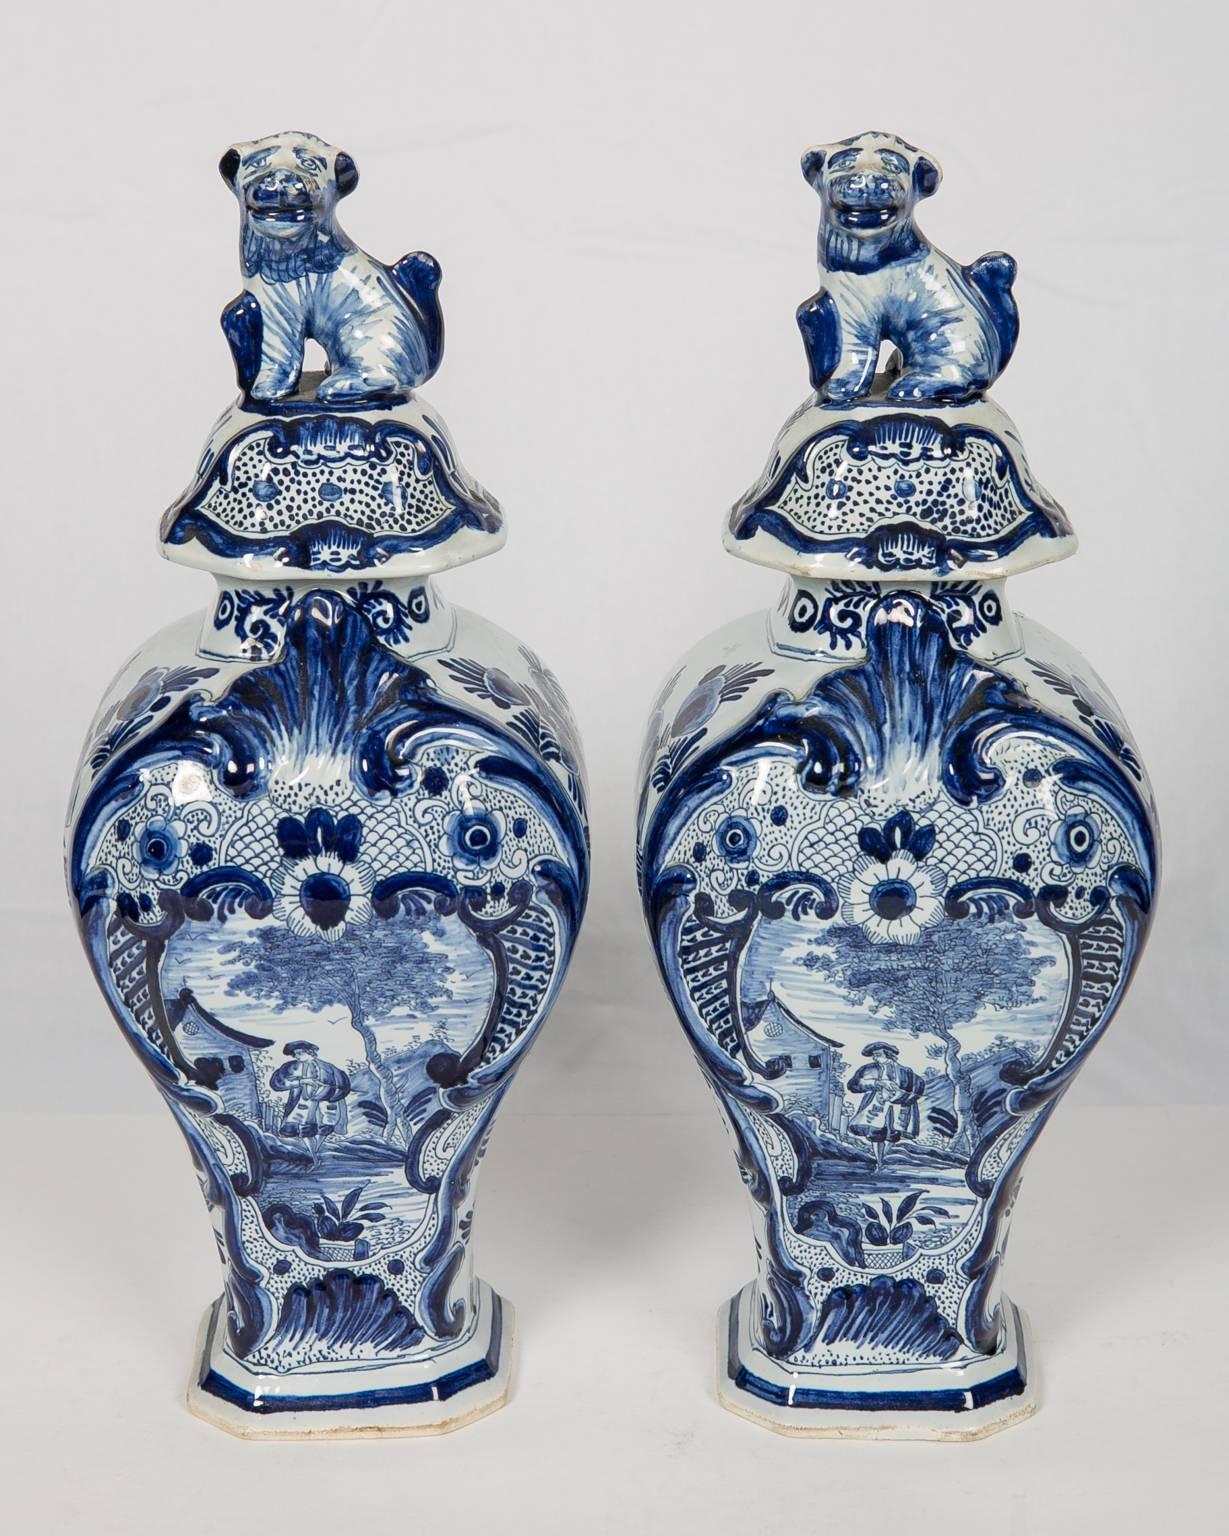 A pair of Dutch Delft blue and white mantel vases painted in particularly beautiful deep cobalt showing a nobleman walking on a country road. To his left we see a Dutch farmhouse, to his right a leafy tree. The scene is framed by a symmetrical